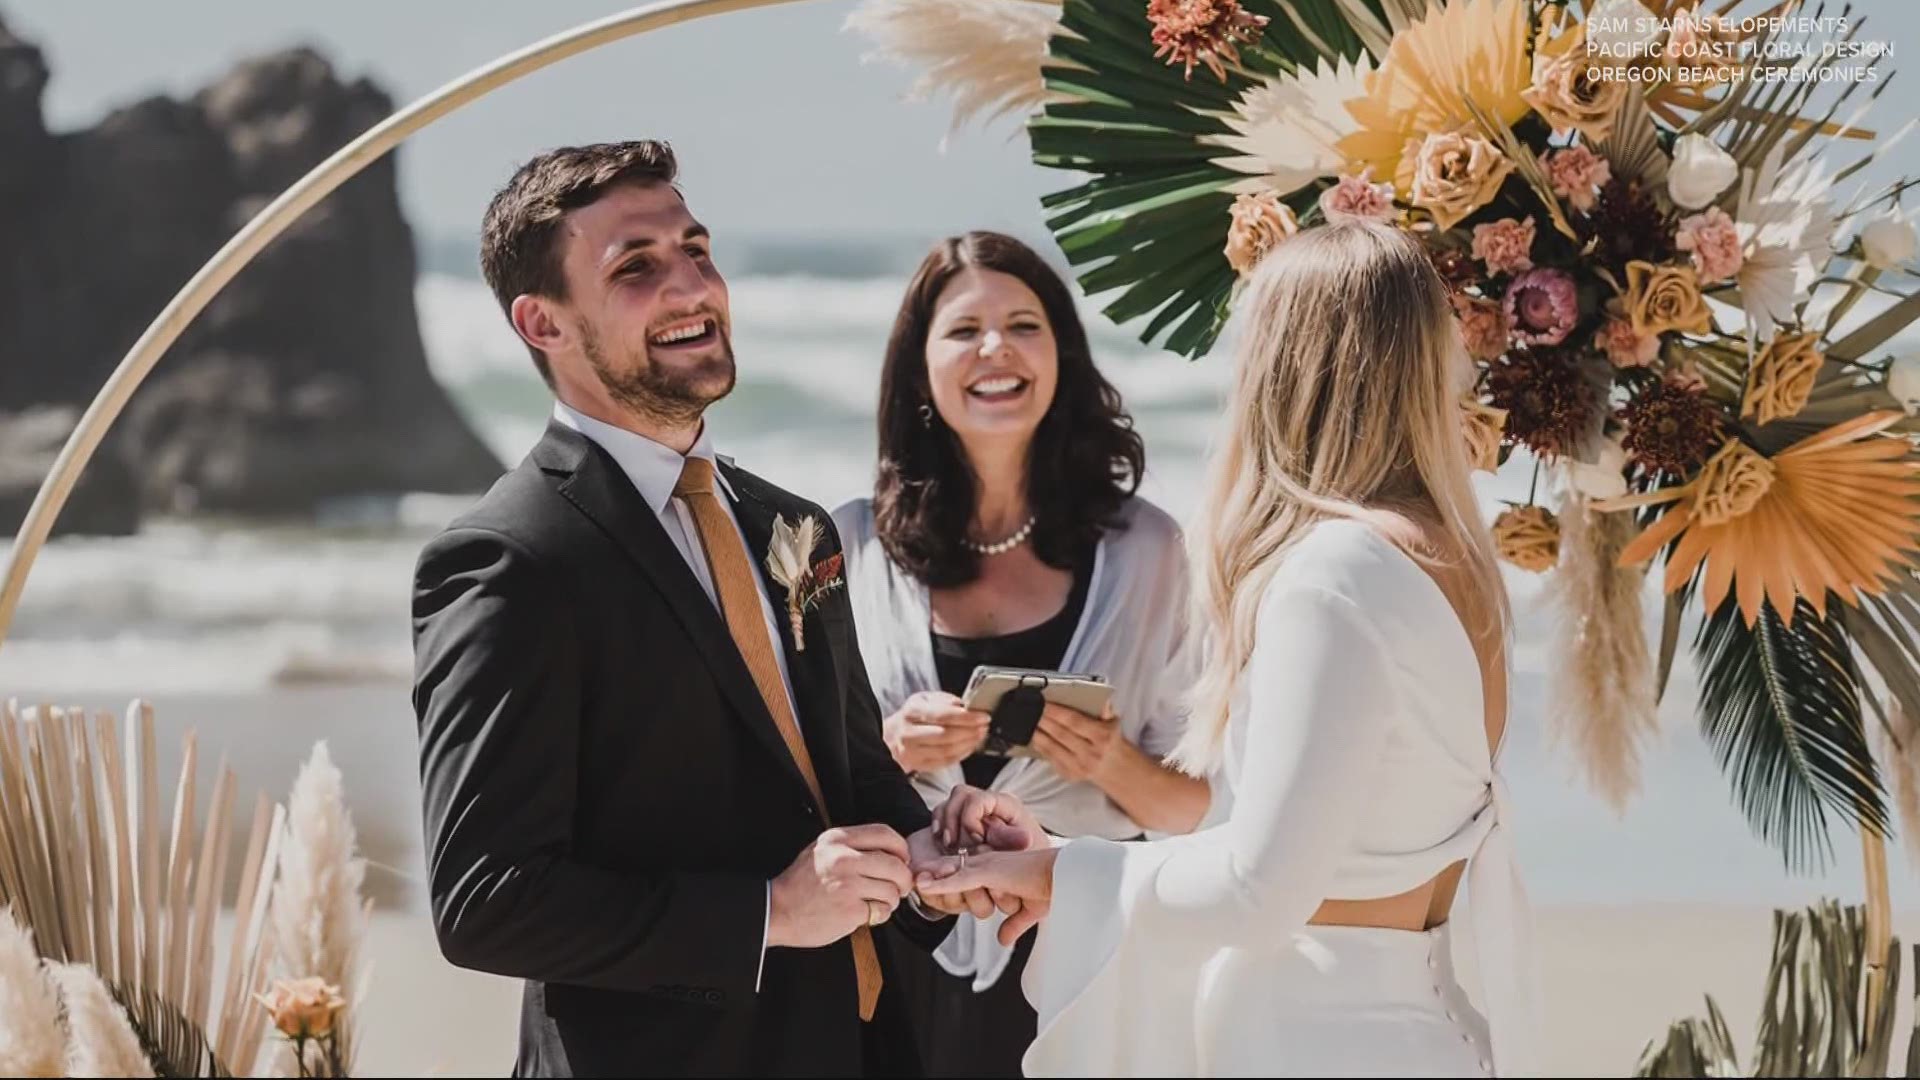 Most permits are on hold until July to limit the number of people on the coast. But some smaller weddings are still permitted.